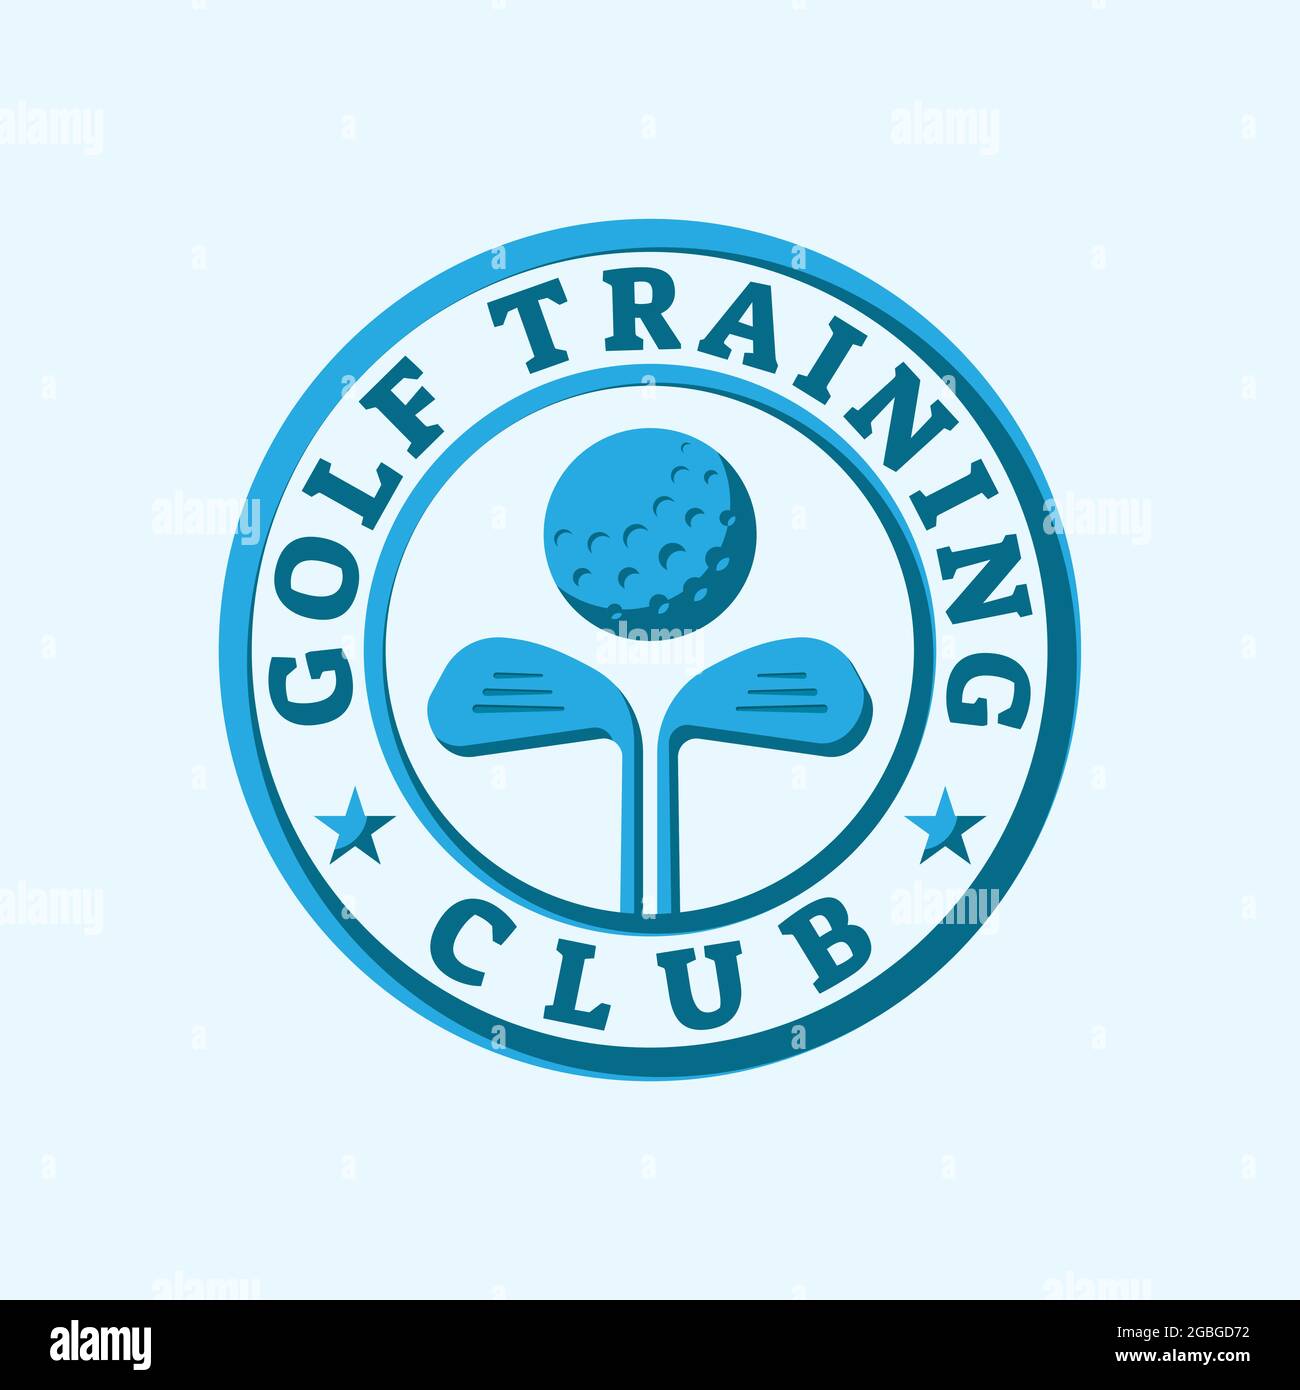 Golf Training Club Stamp Seal Emblem Logo with Stars, ball and stick shape design element.  Vector design template. Blue, cyan color identity. Stock Vector